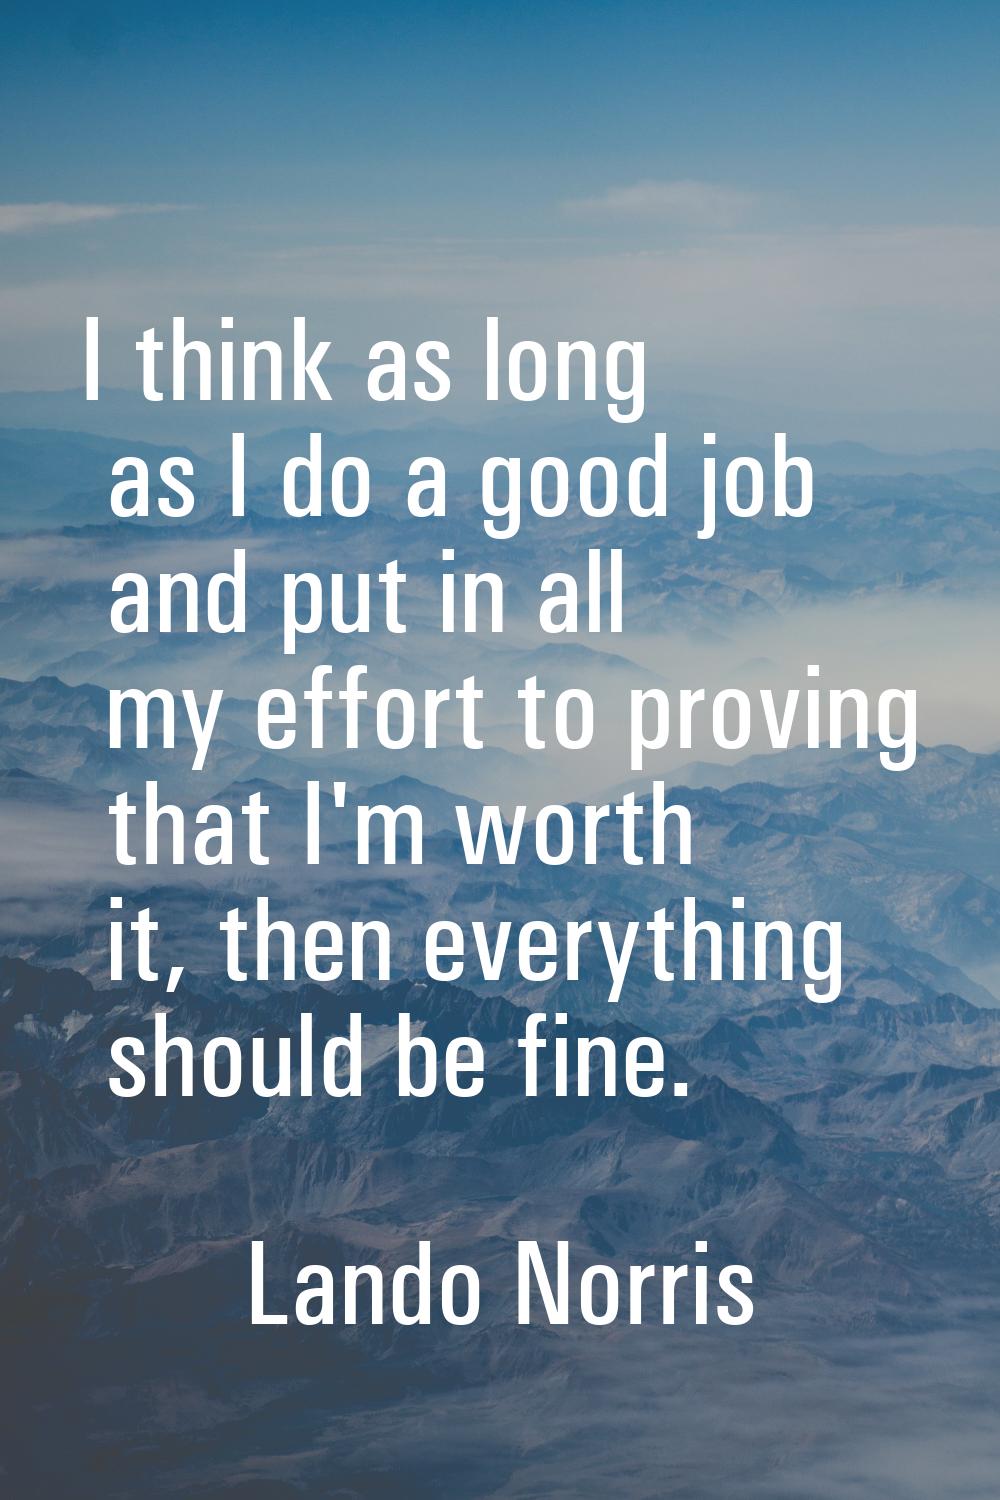 I think as long as I do a good job and put in all my effort to proving that I'm worth it, then ever